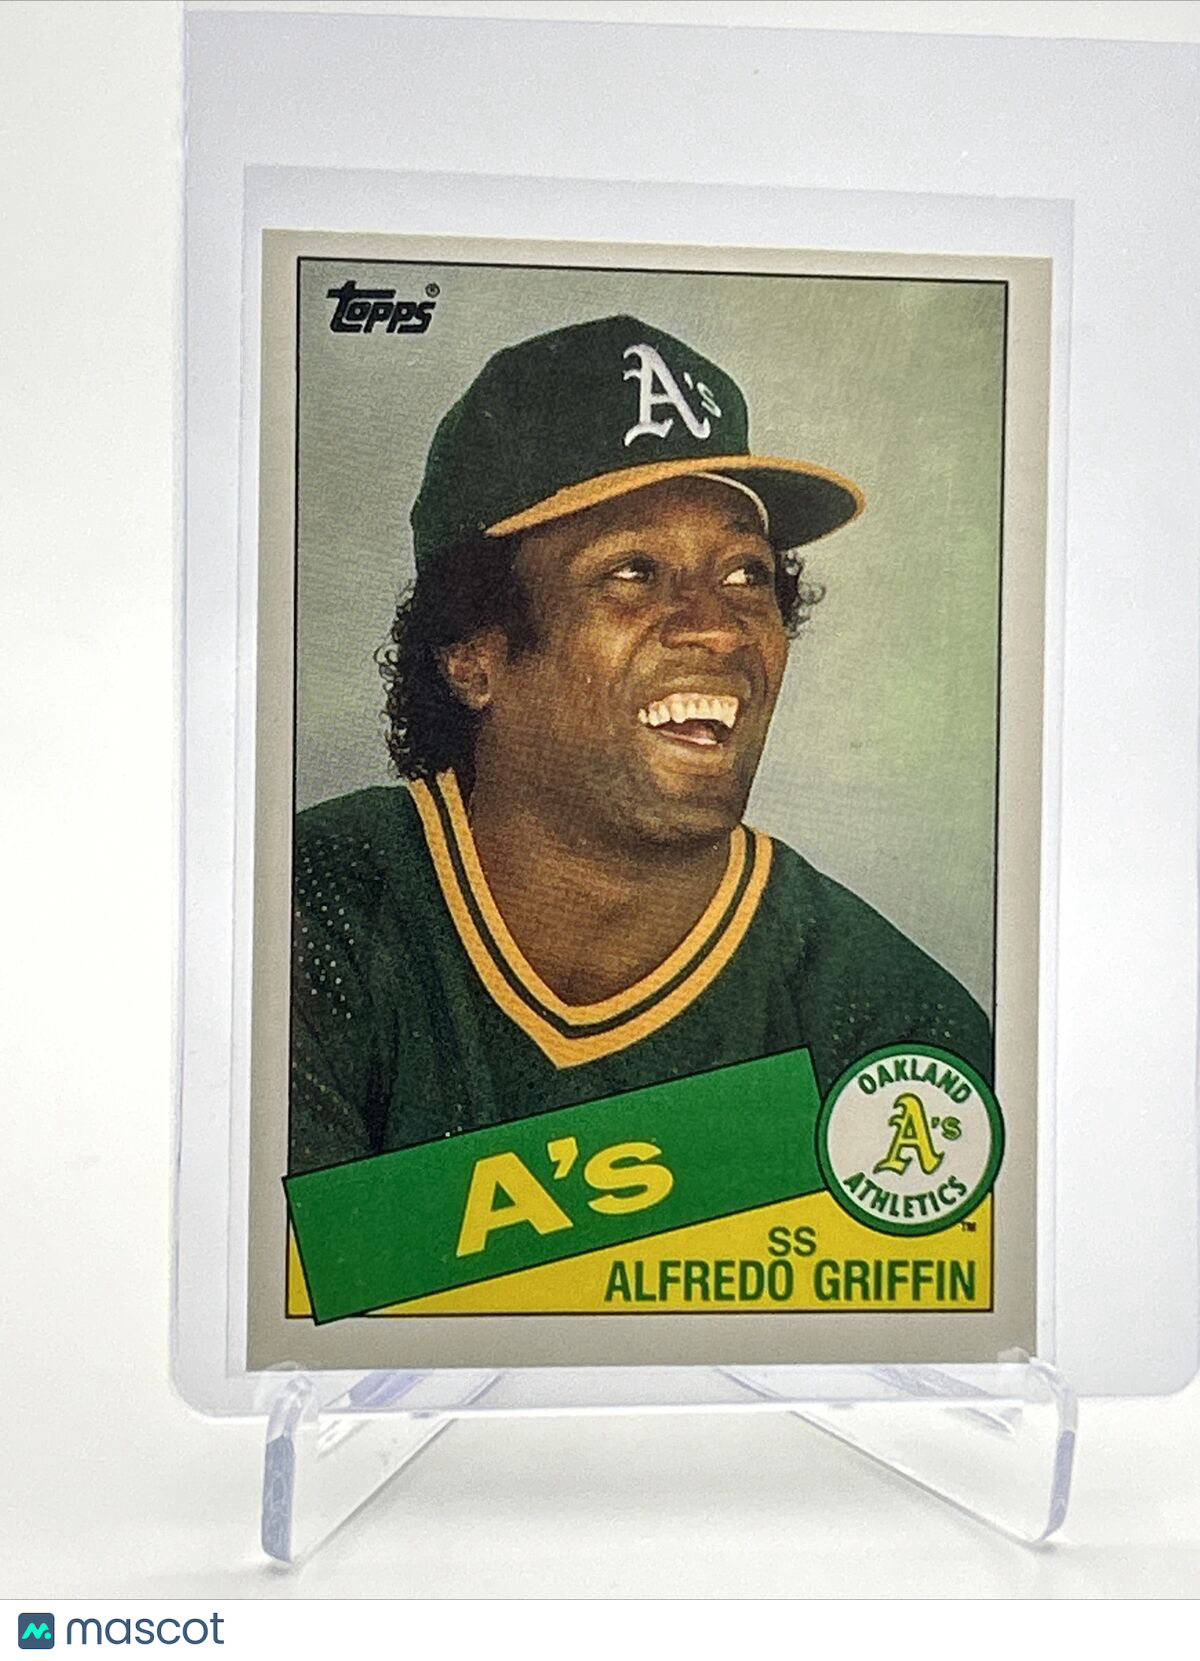 1985 Topps Traded Alfredo Griffin Baseball Card #42T NM-MT FREE SHIPPING